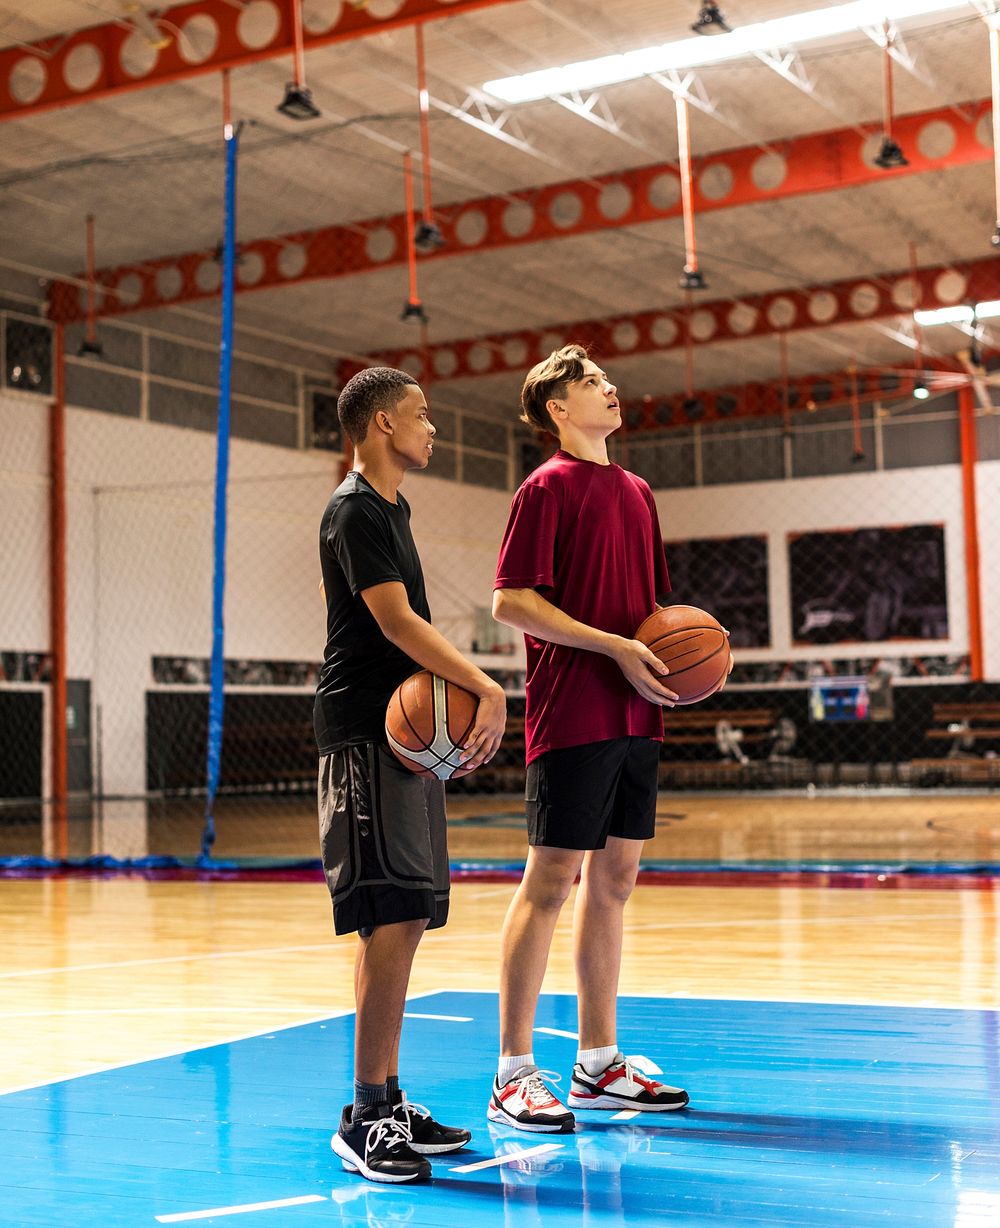 Teenage boys holding basketball on the court team and aspiration concept